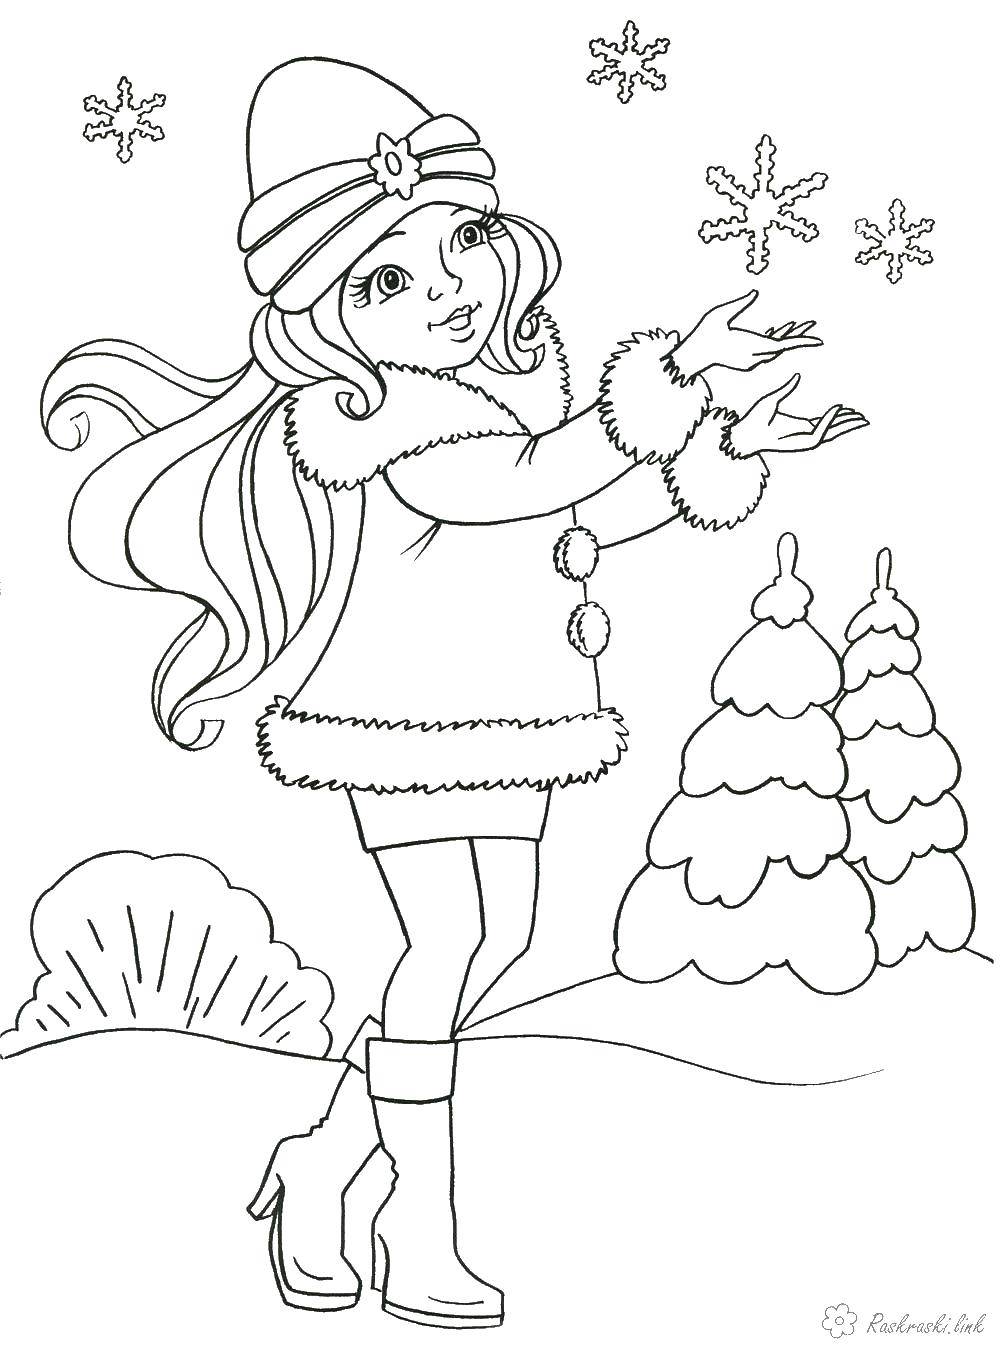 Coloring Girl catches snowflakes. Category People. Tags:  girl.